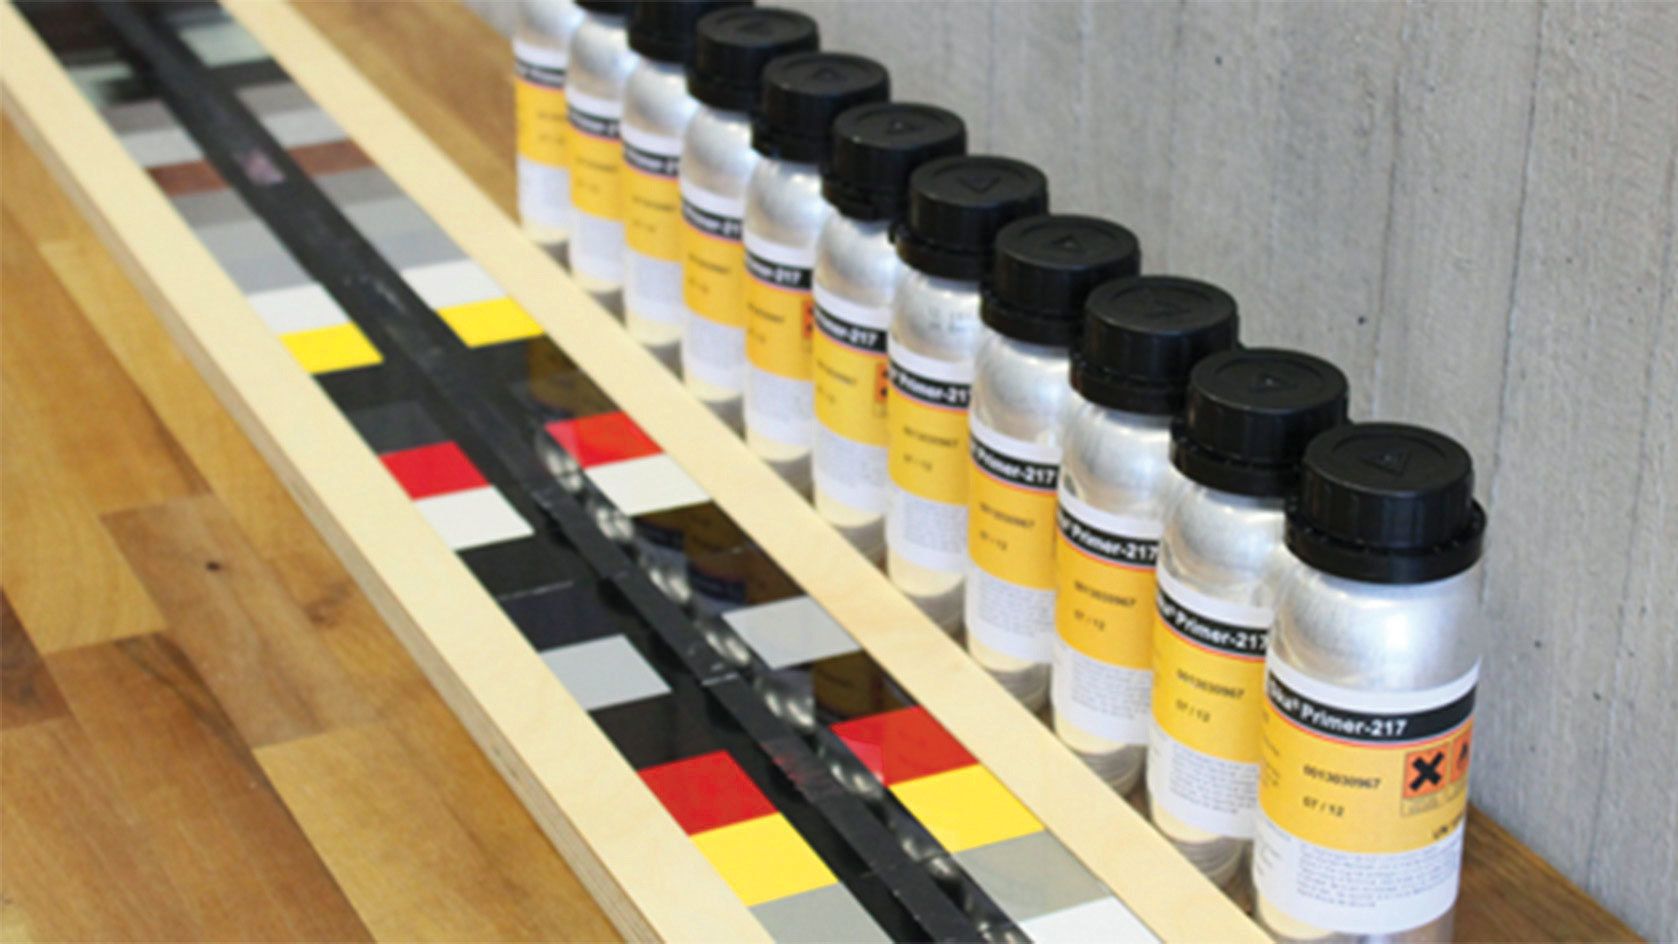 View of Pre-Treatment bottles including Sika Aktivator, Primer and cleaner